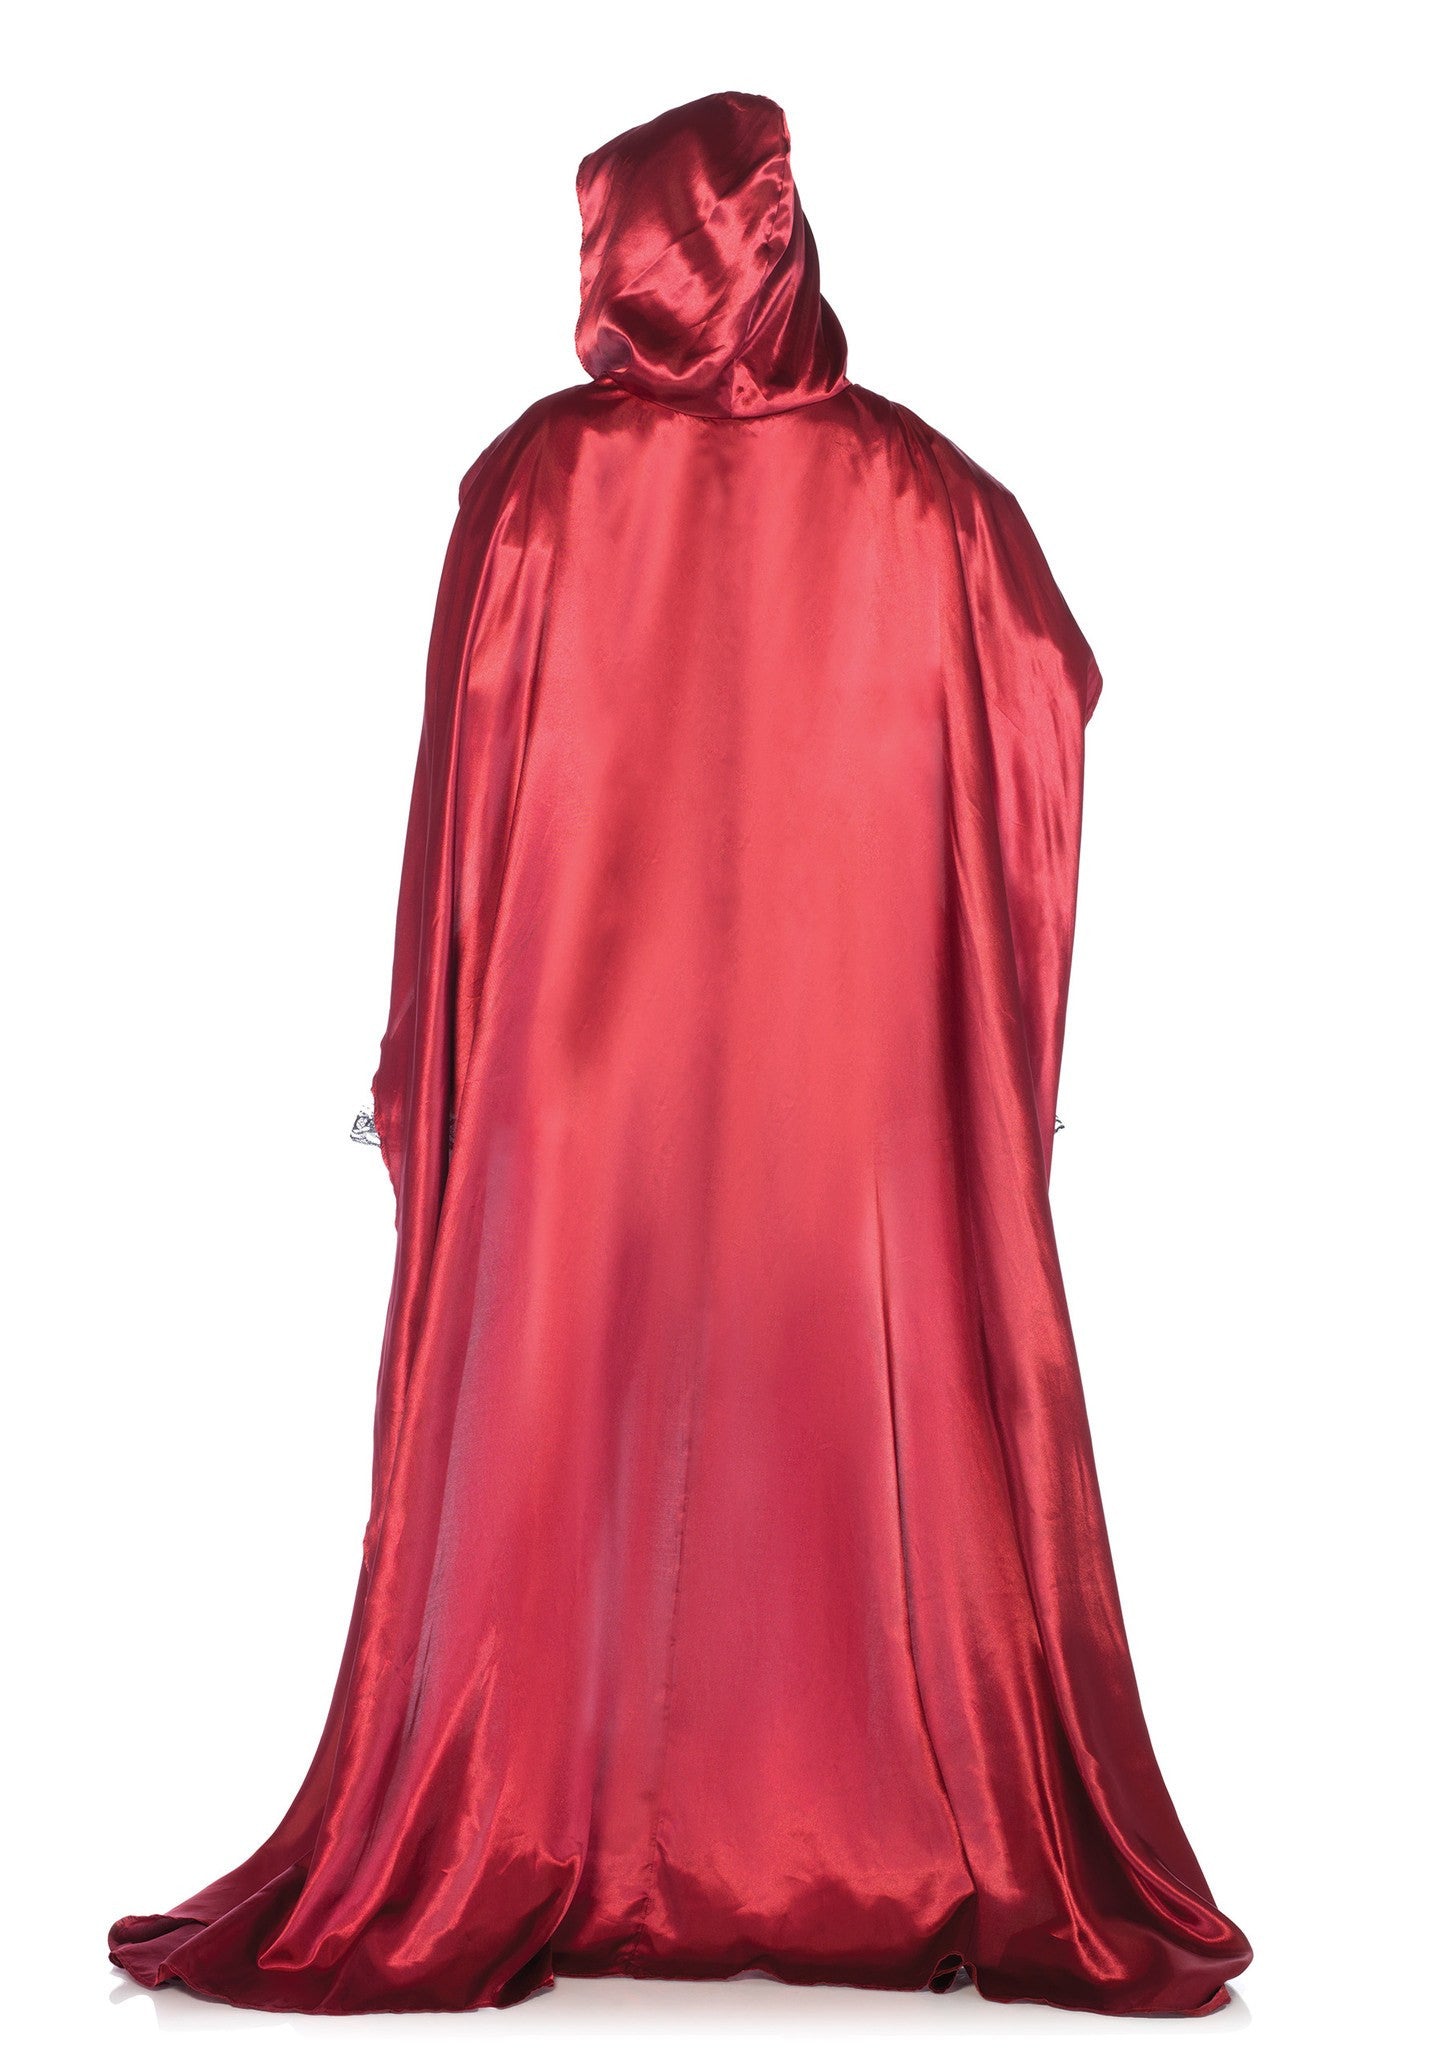 Costume - Captivating Miss Red Riding Hood Costume - Little Red Riding Hood